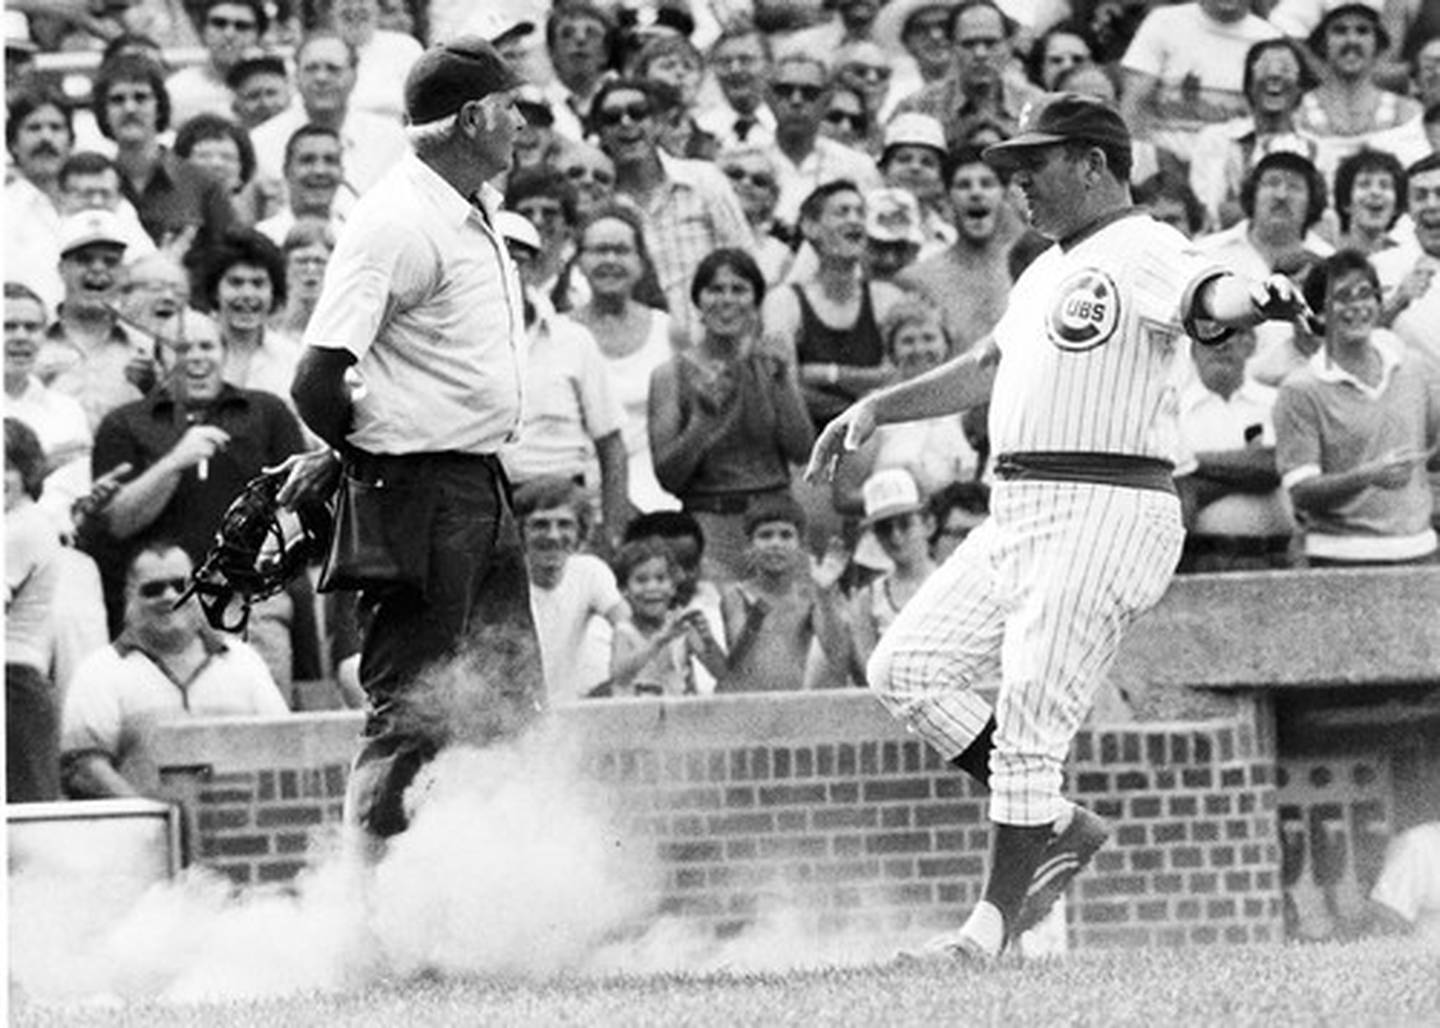 Cubs manager Herman Franks kicks dirt on umpire Doug Harvey during a game at Wrigley Field on Sept. 7, 1978.